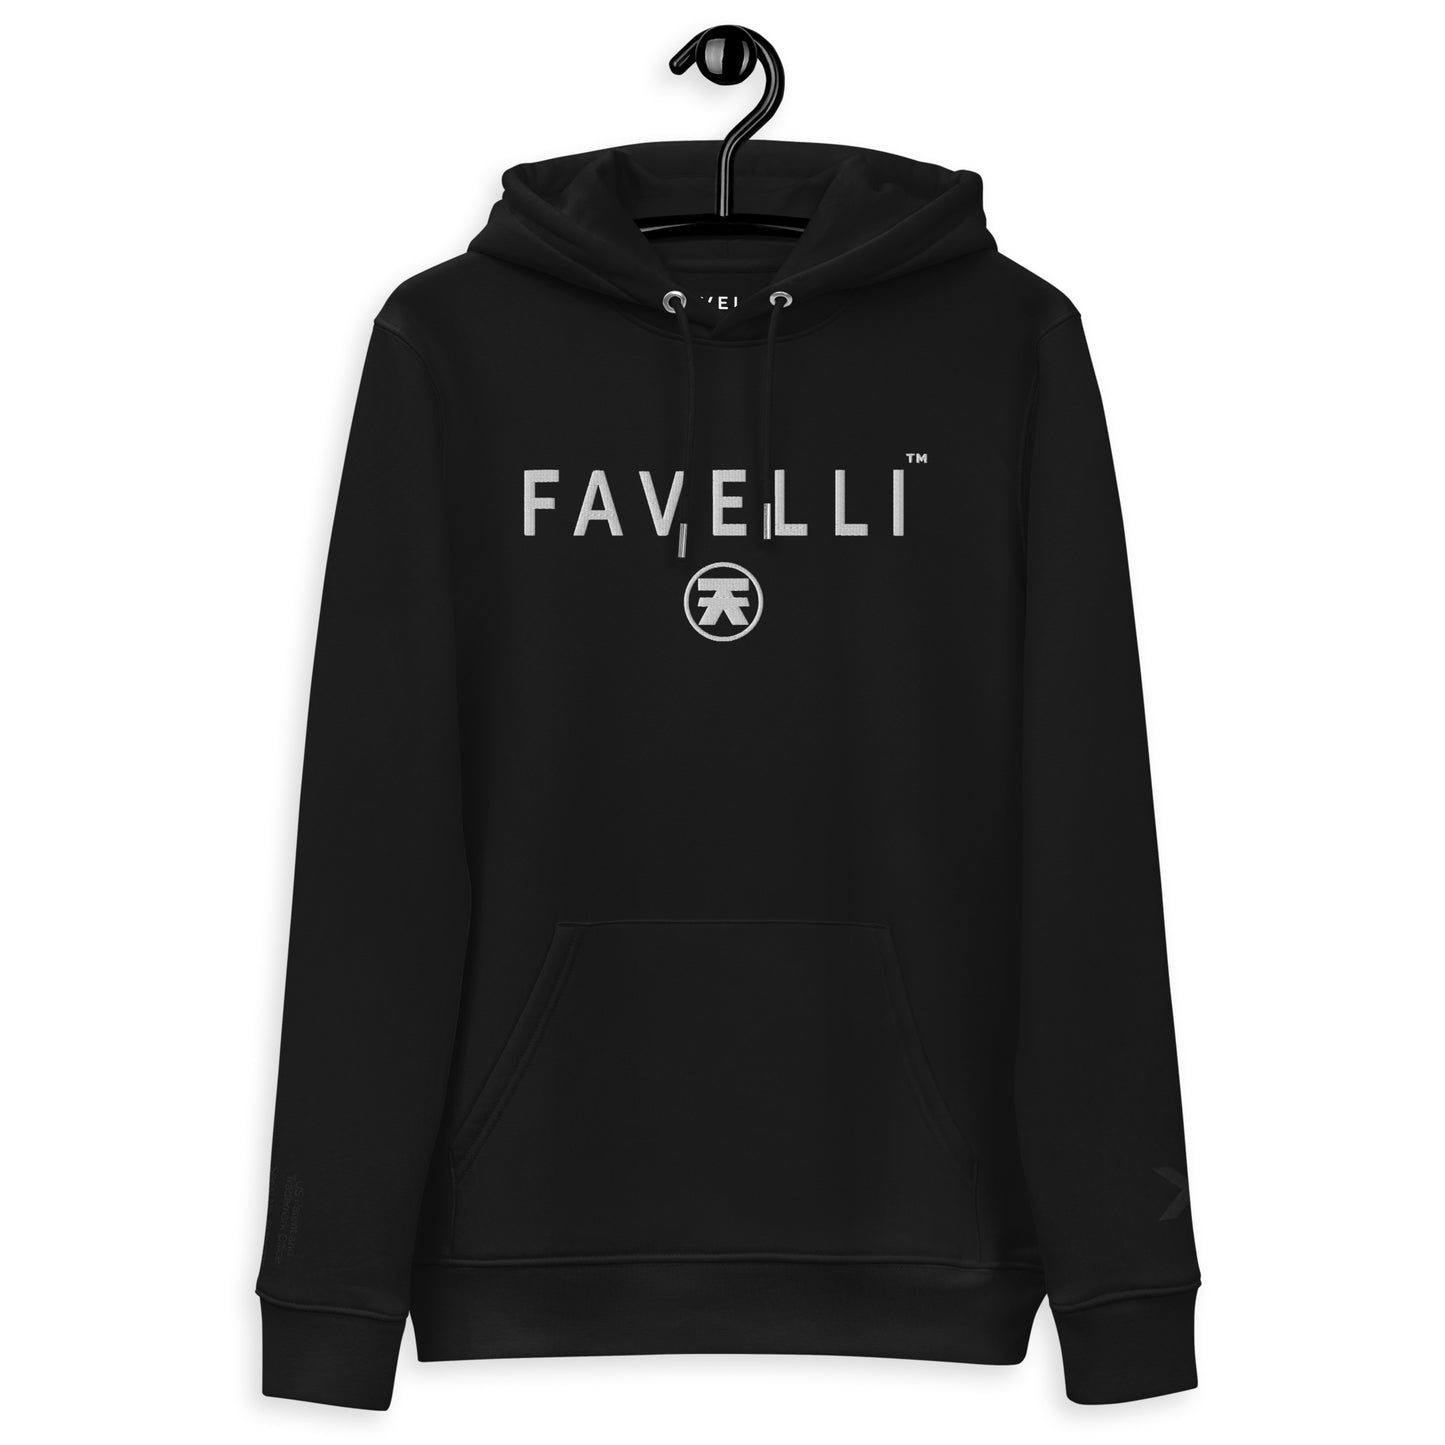 The Favelli embroidered hoodie is a heavyweight 85% organic cotton sweatshirt with a double-layered hood, set-in sleeves, and a front pouch pocket. 